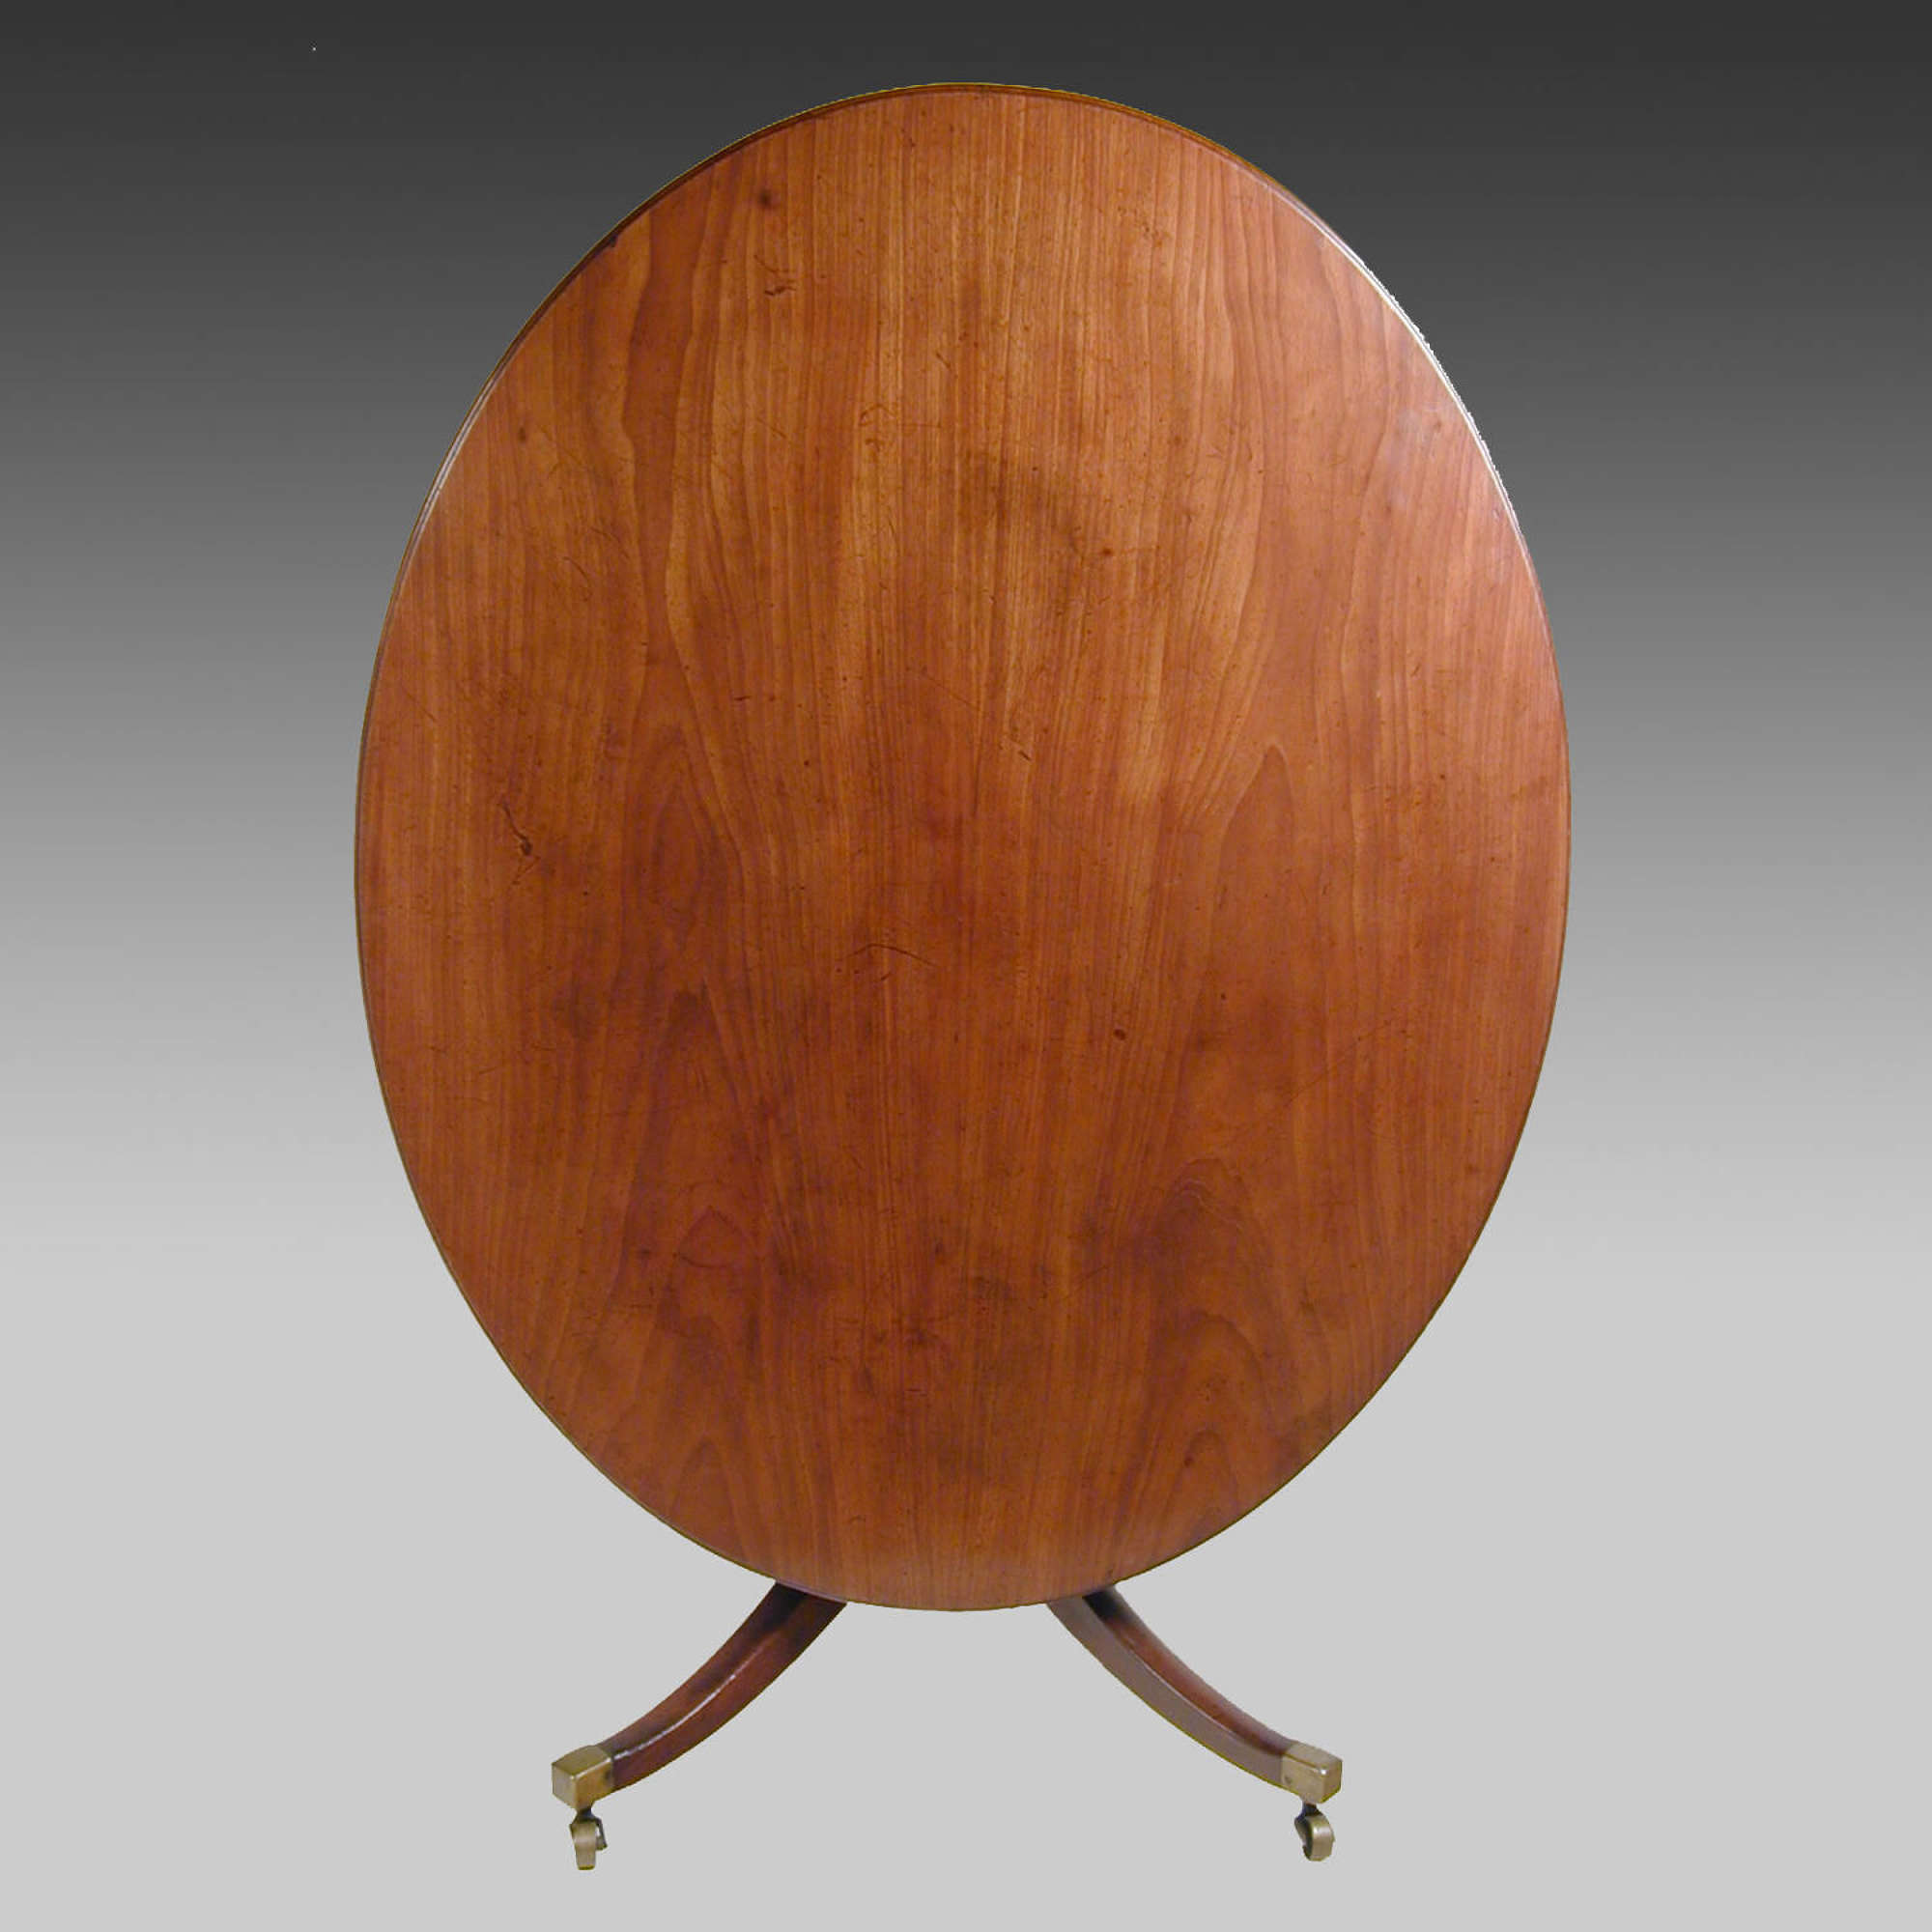 Fine late 18th century oval mahogany dining or centre table